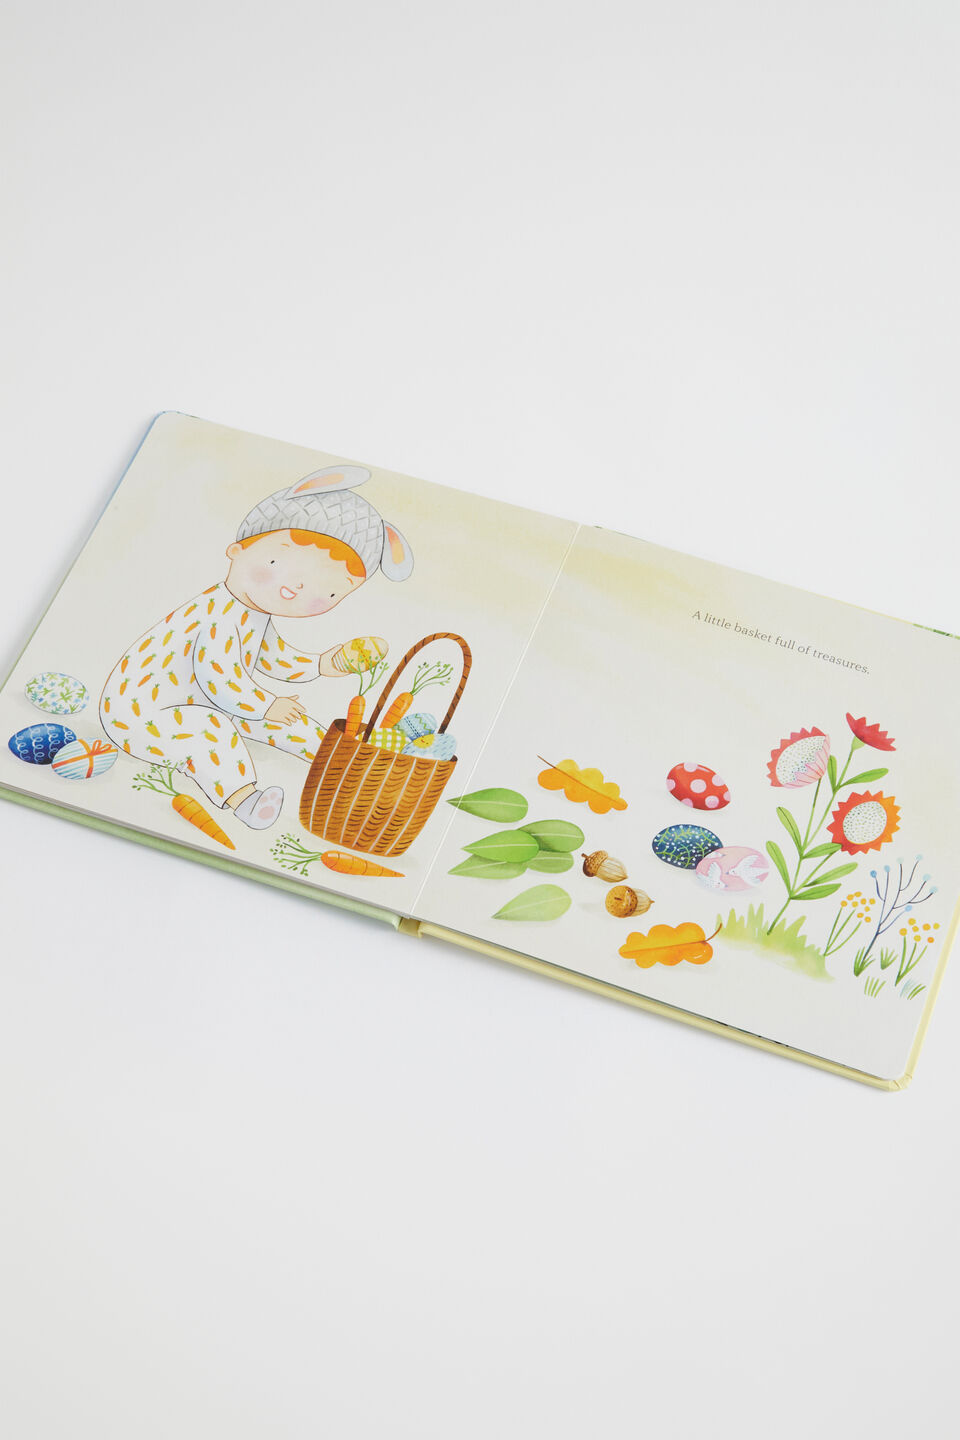 Baby's First Easter Book  Multi